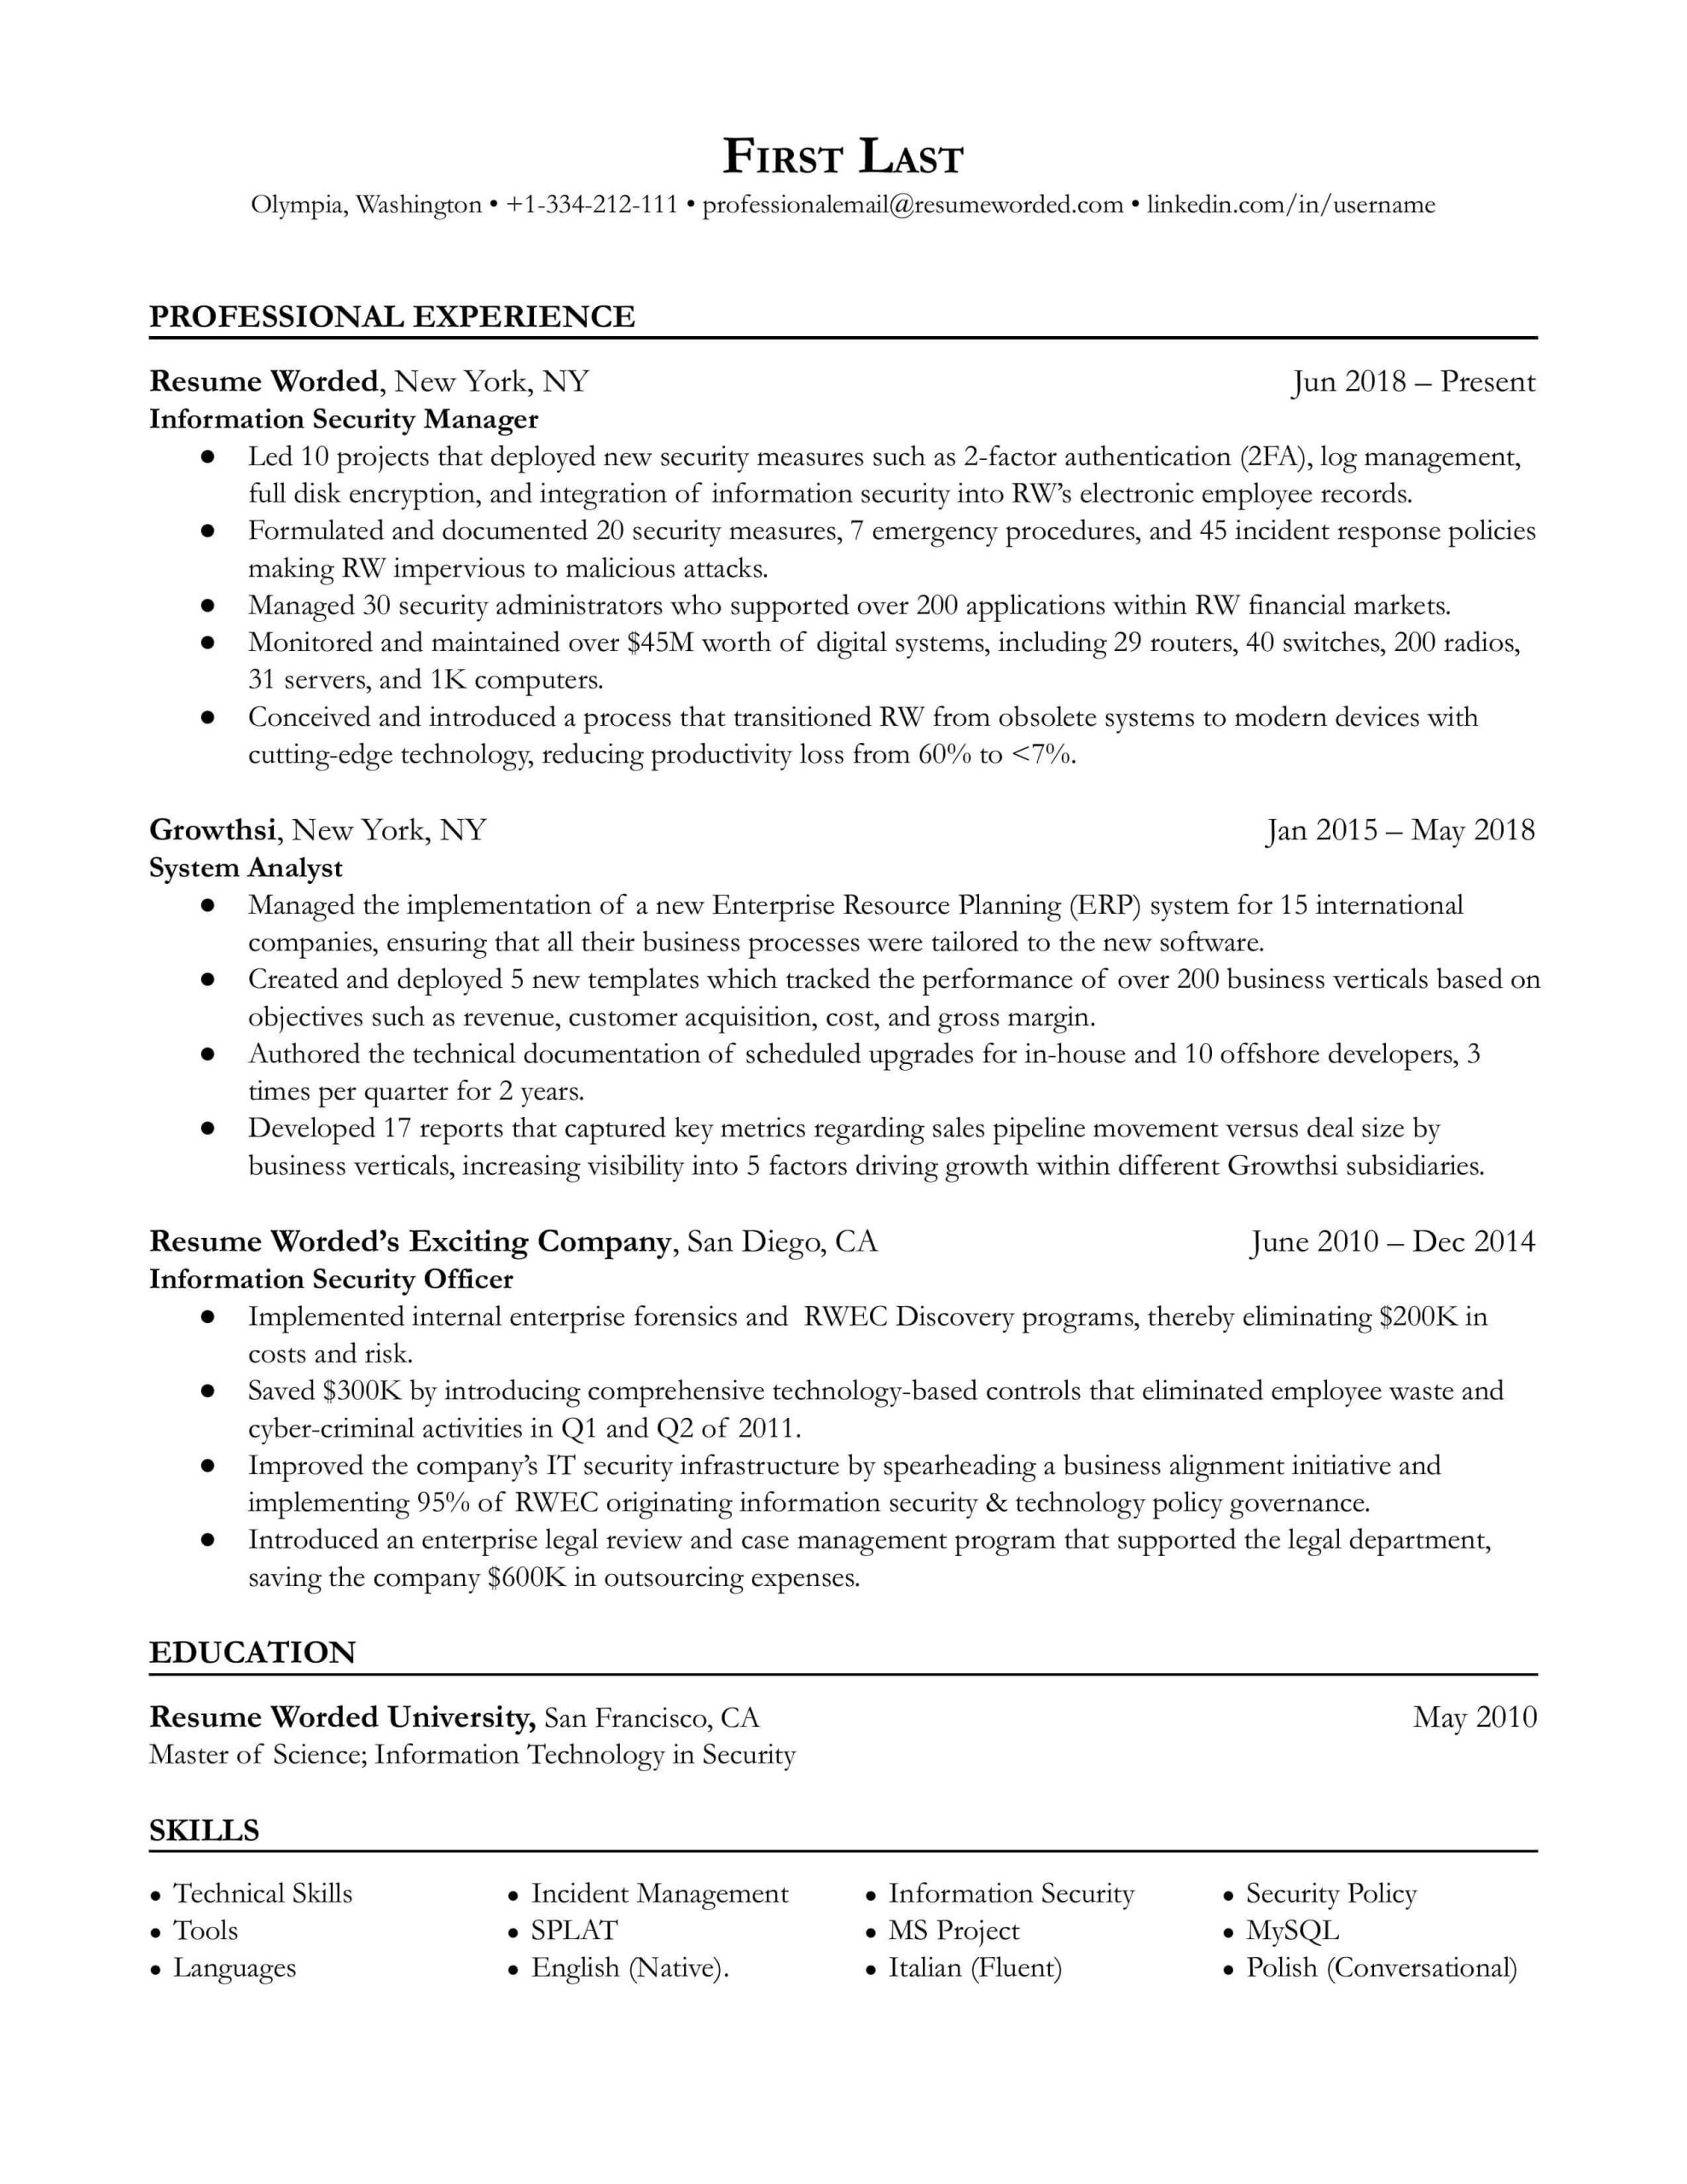 Information Security Project Manager Sample Resume Information Security Manager Resume Example for 2022 Resume Worded